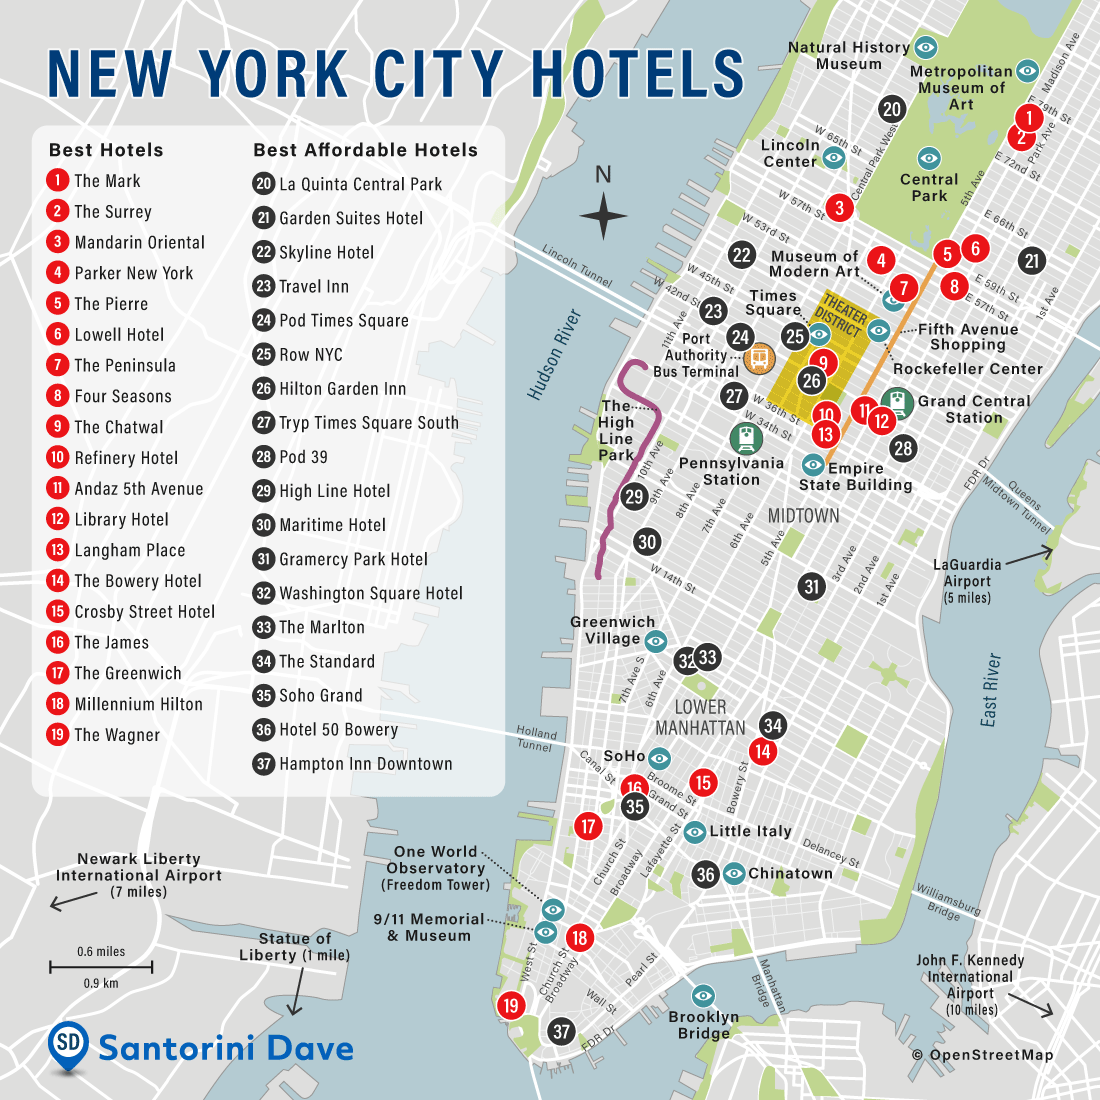 NEW YORK HOTEL MAP - Best Areas, Neighborhoods, & Places to Stay in NYC